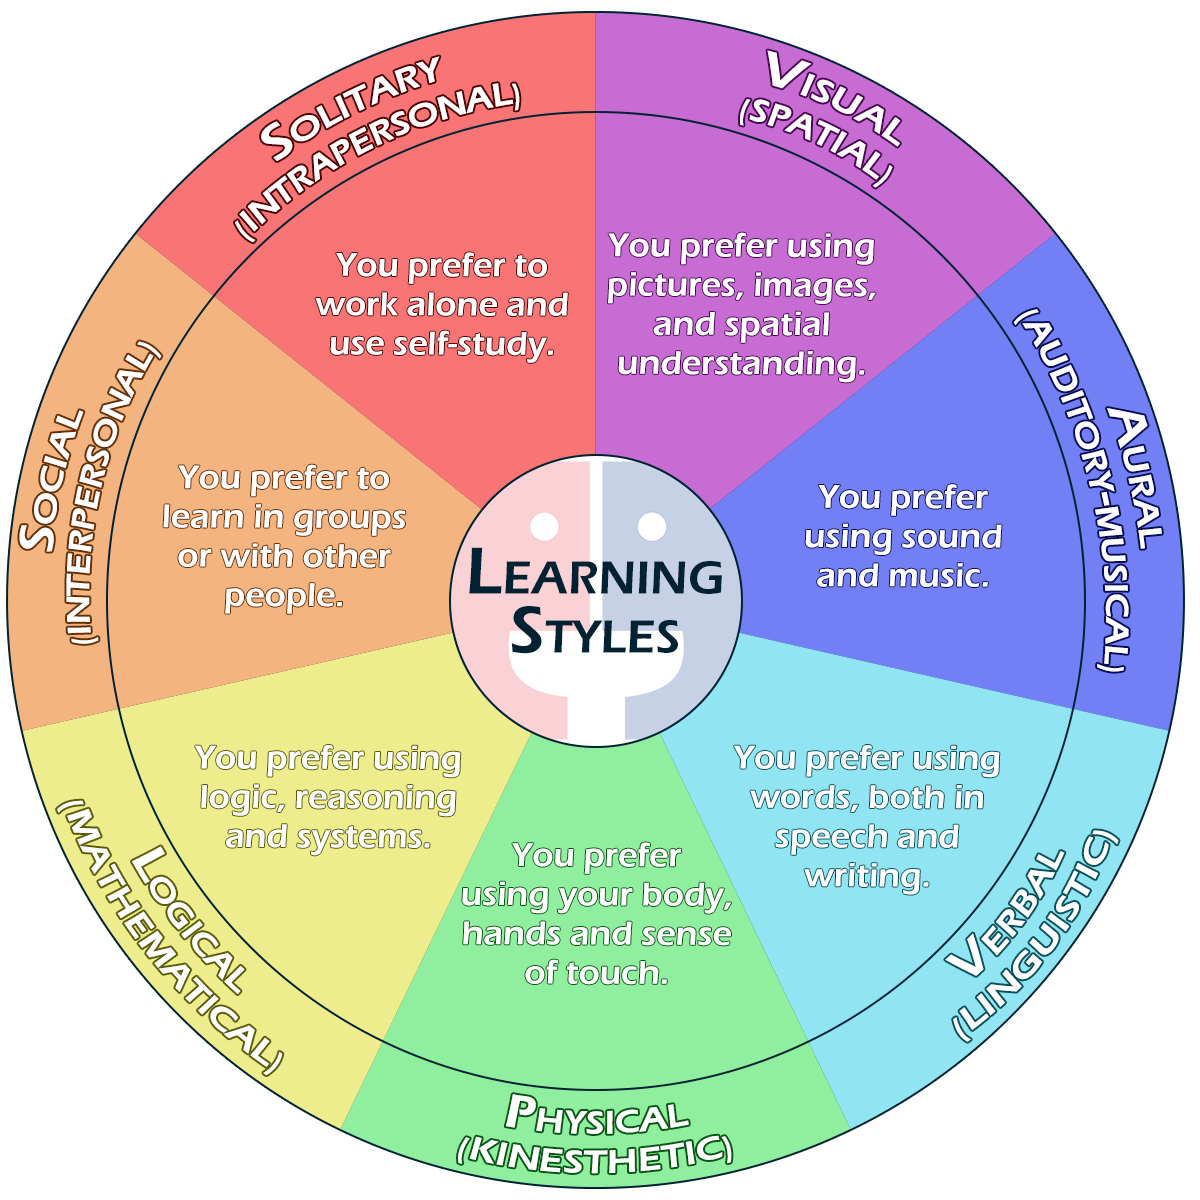 Learning Styles